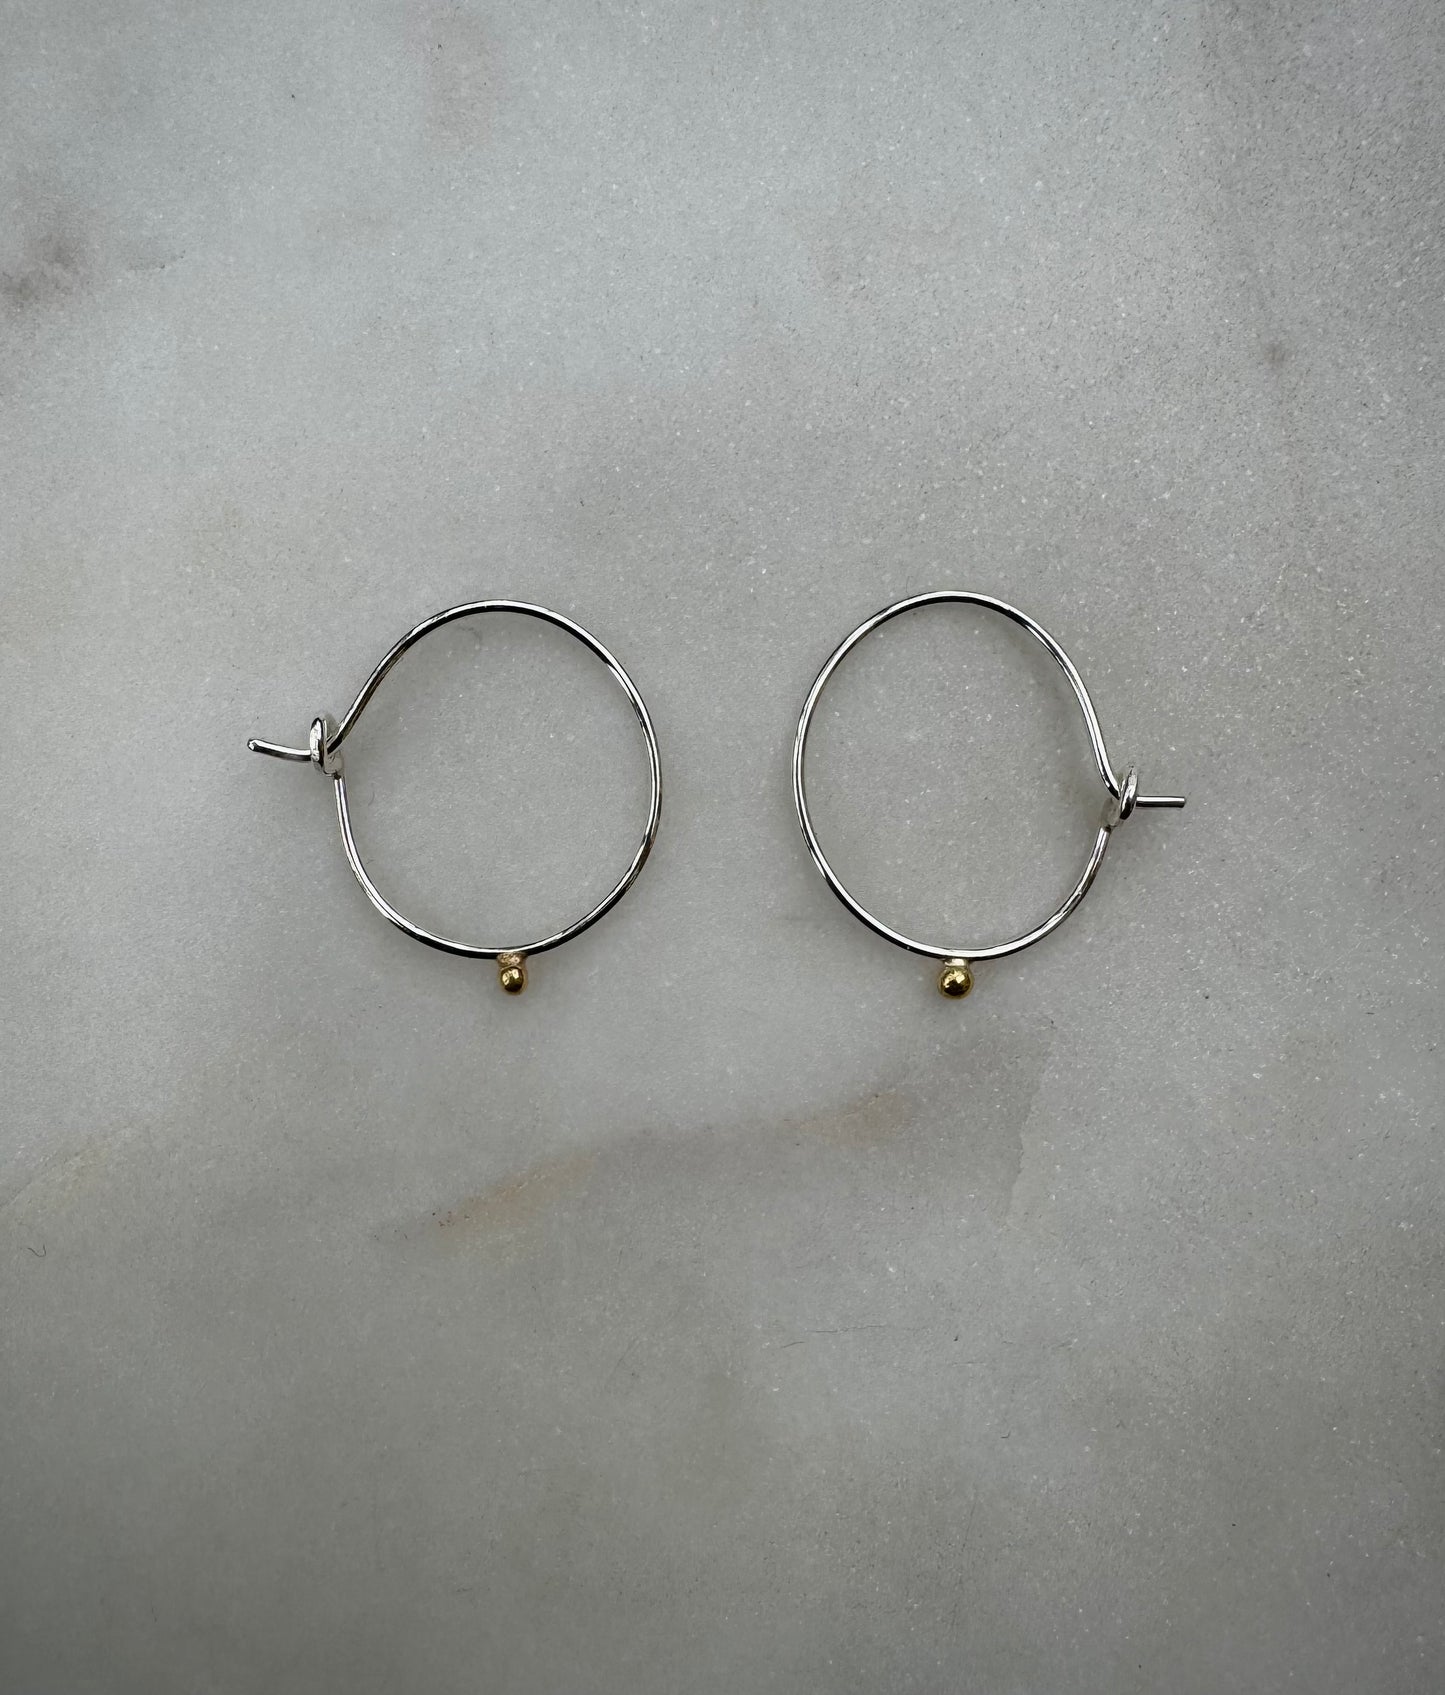 18k fairtrade gold and sterling silver earrings